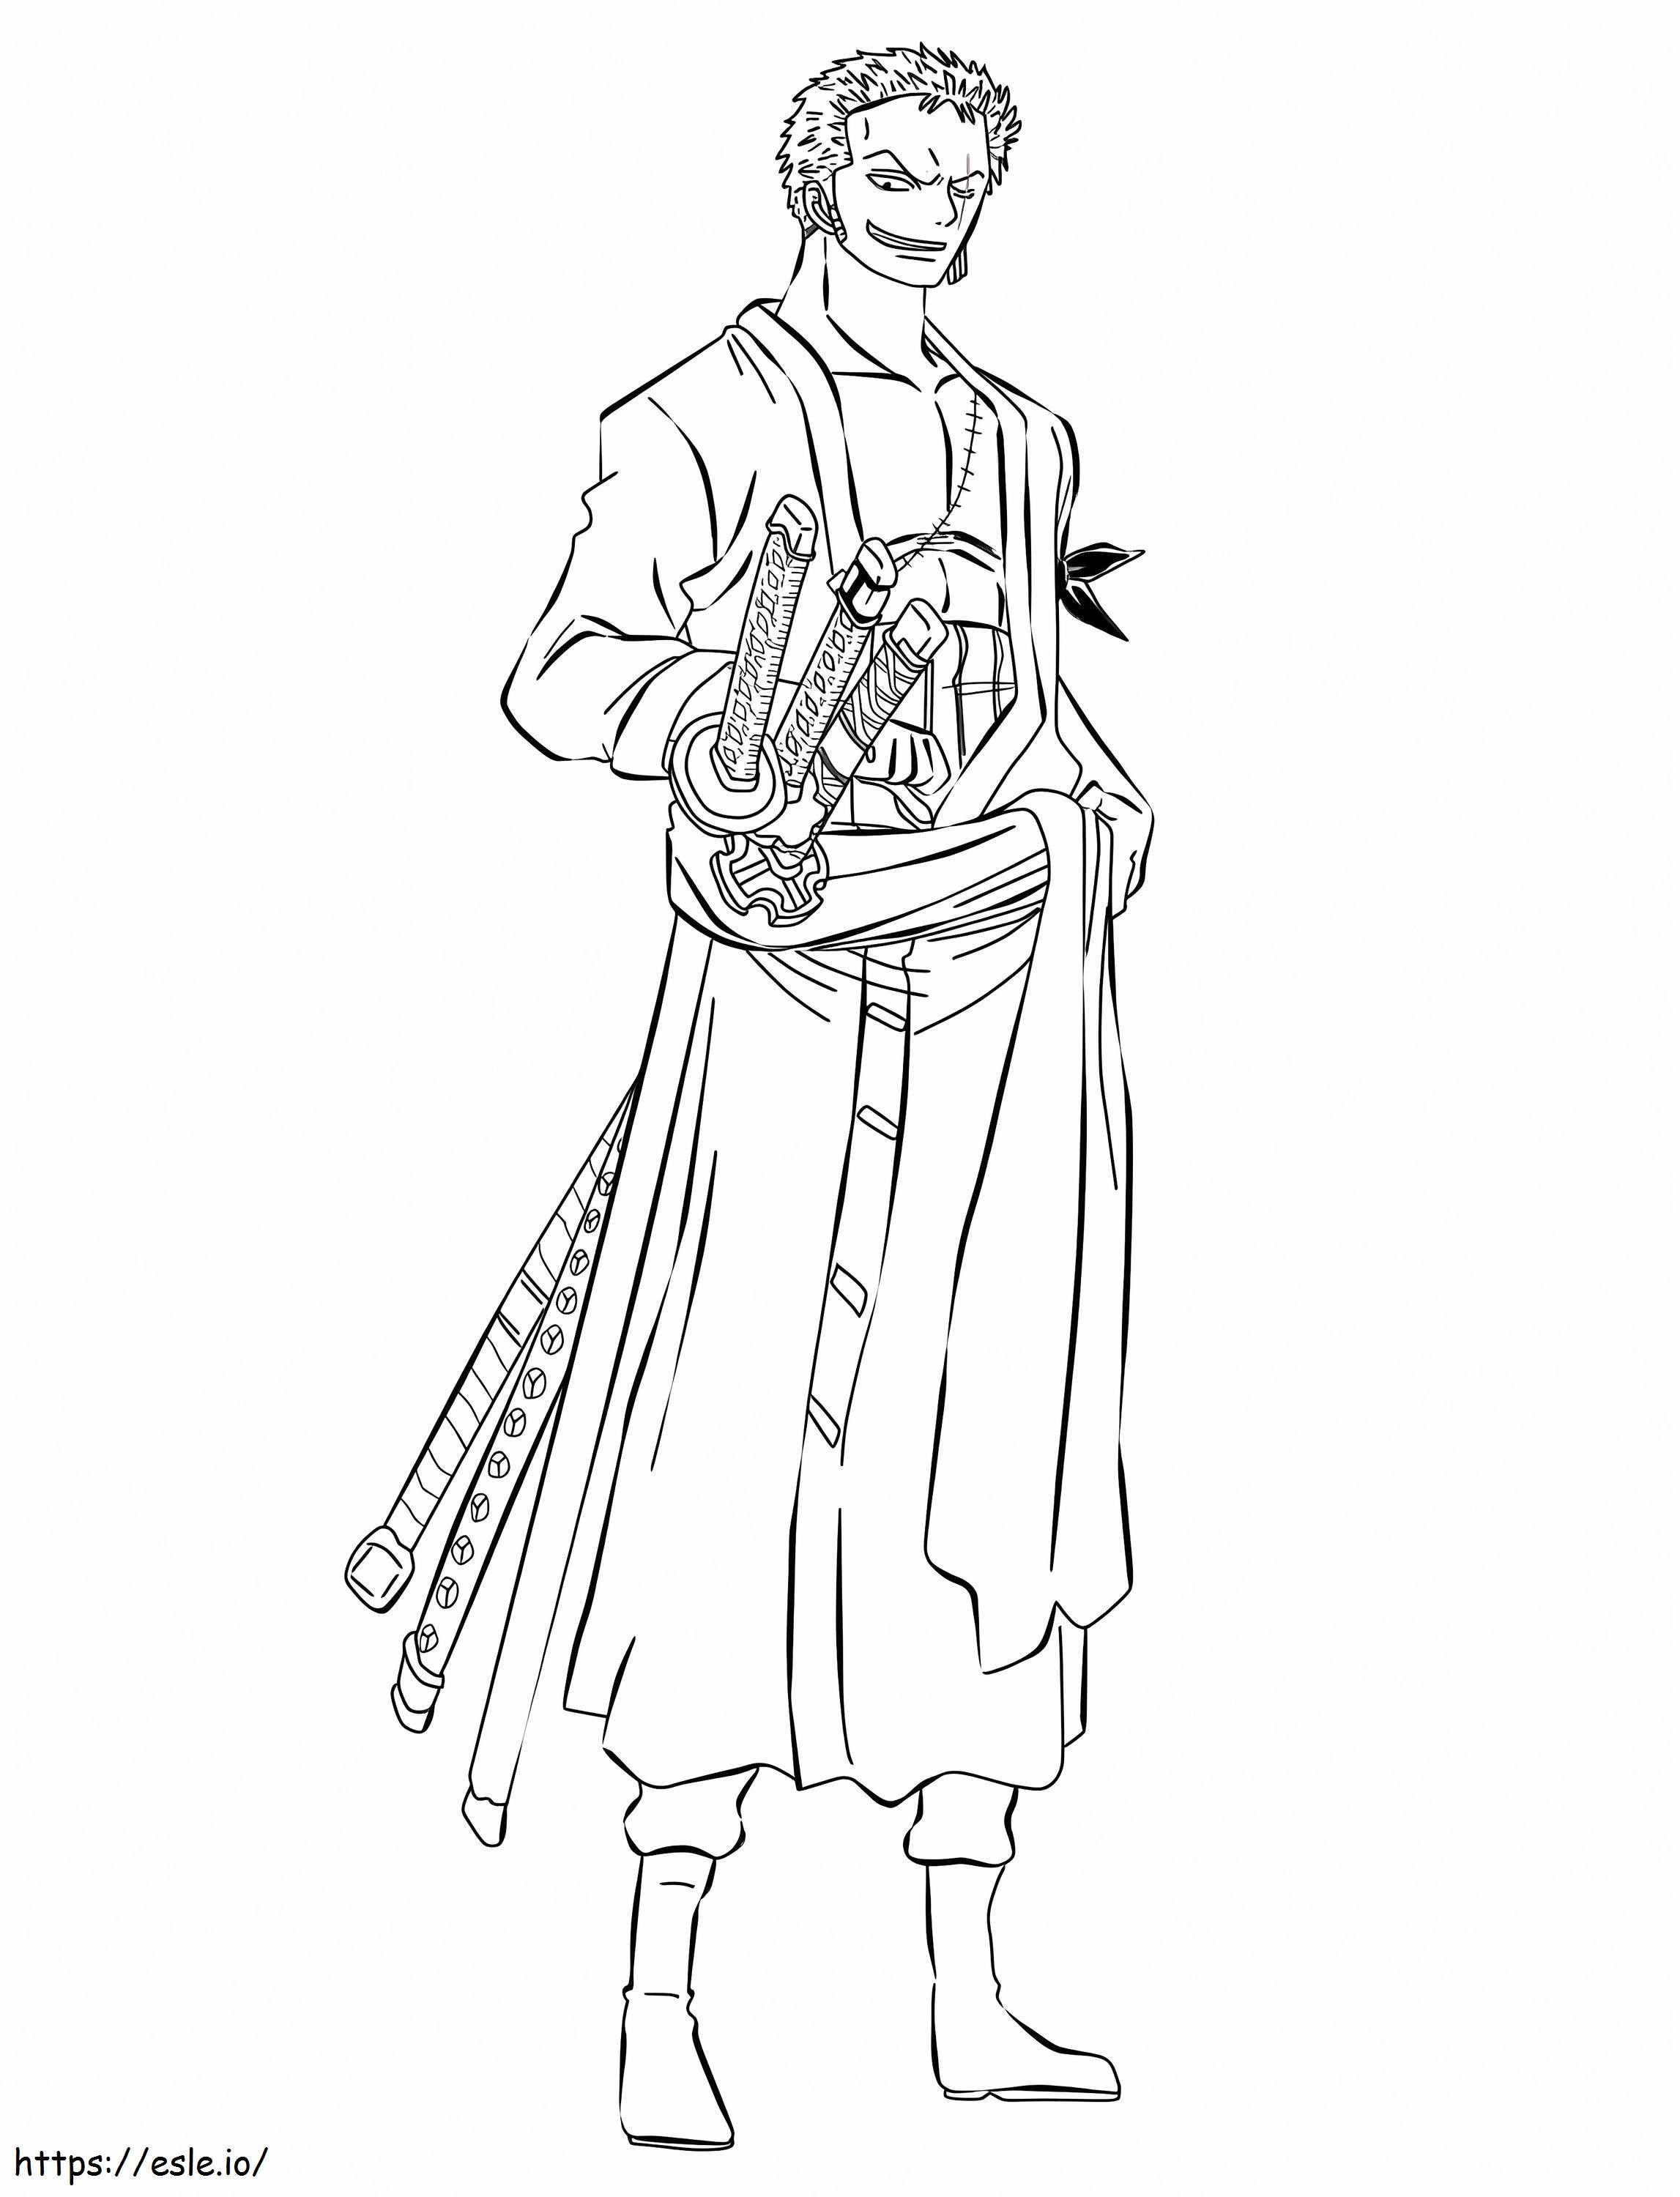 Zoro Smiling coloring page